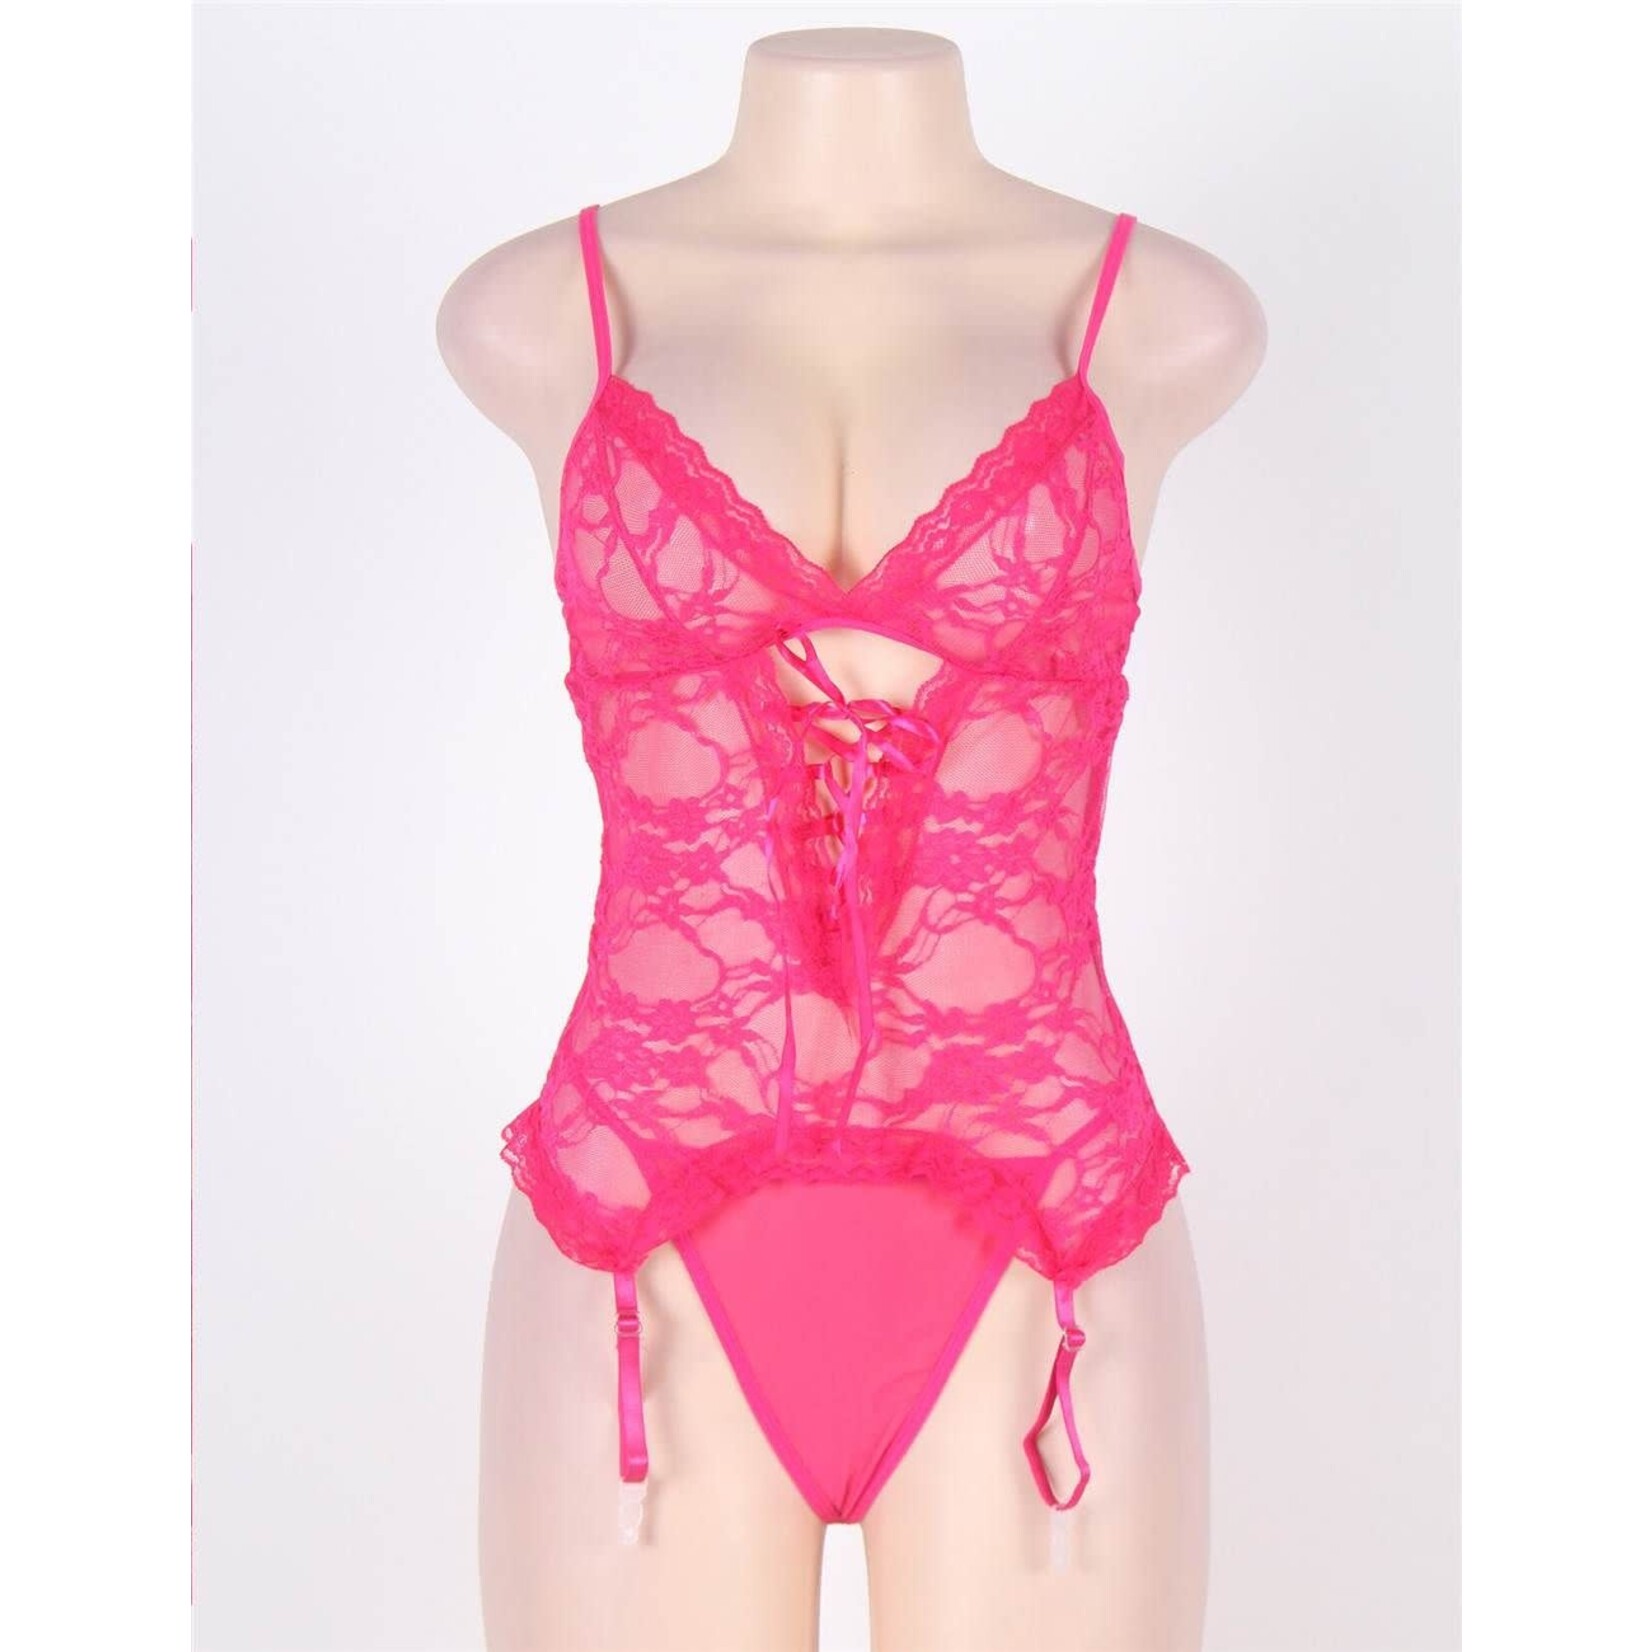 OH YEAH! -  ROSY OPEN BACK LACE TEDDY L